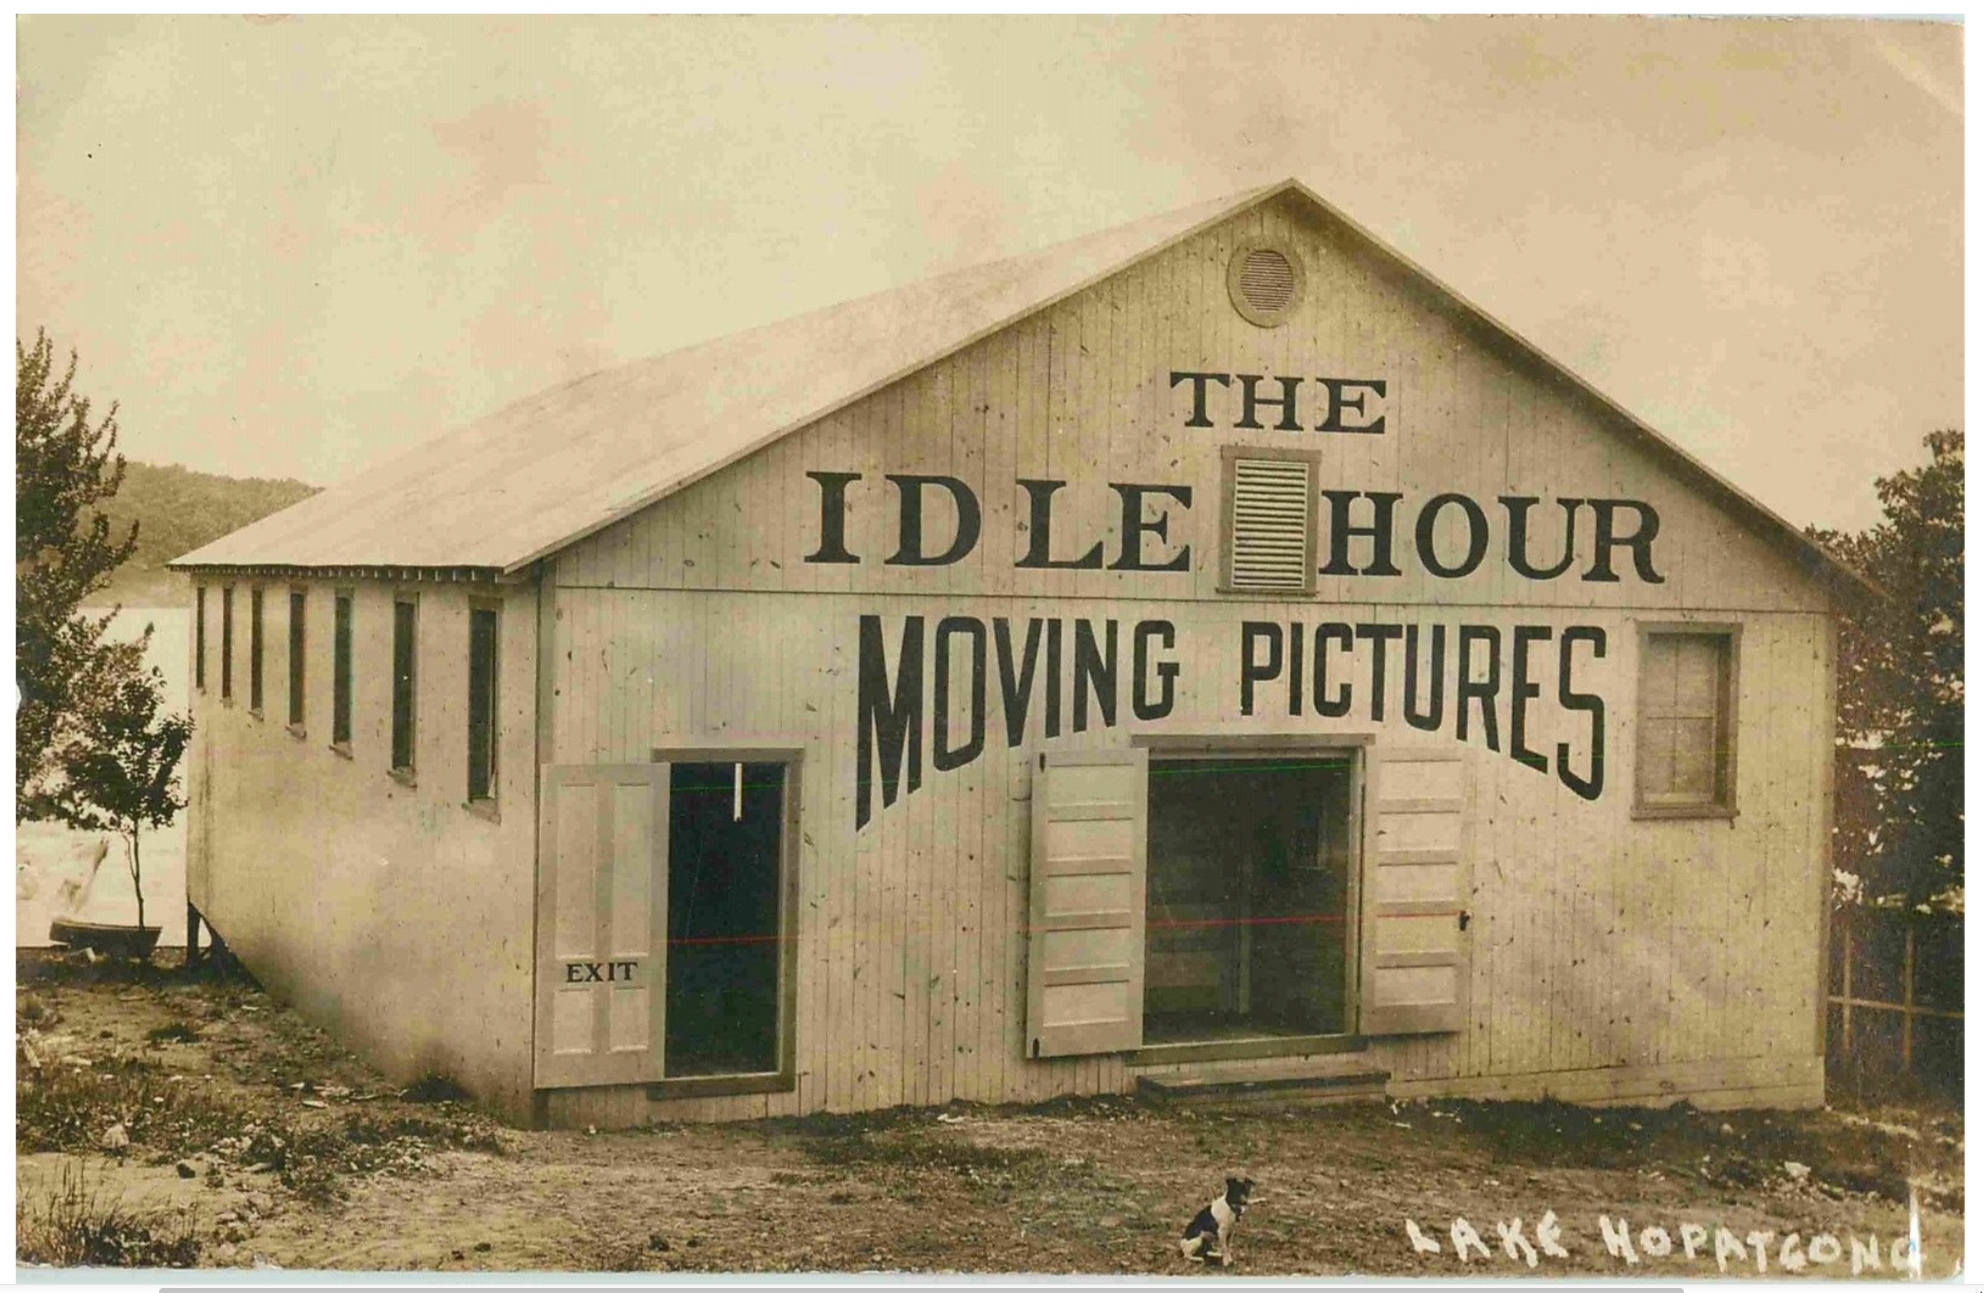 Lake Hopatcong - The Idle Hour Motion Pictures Theater - c 1910-10s